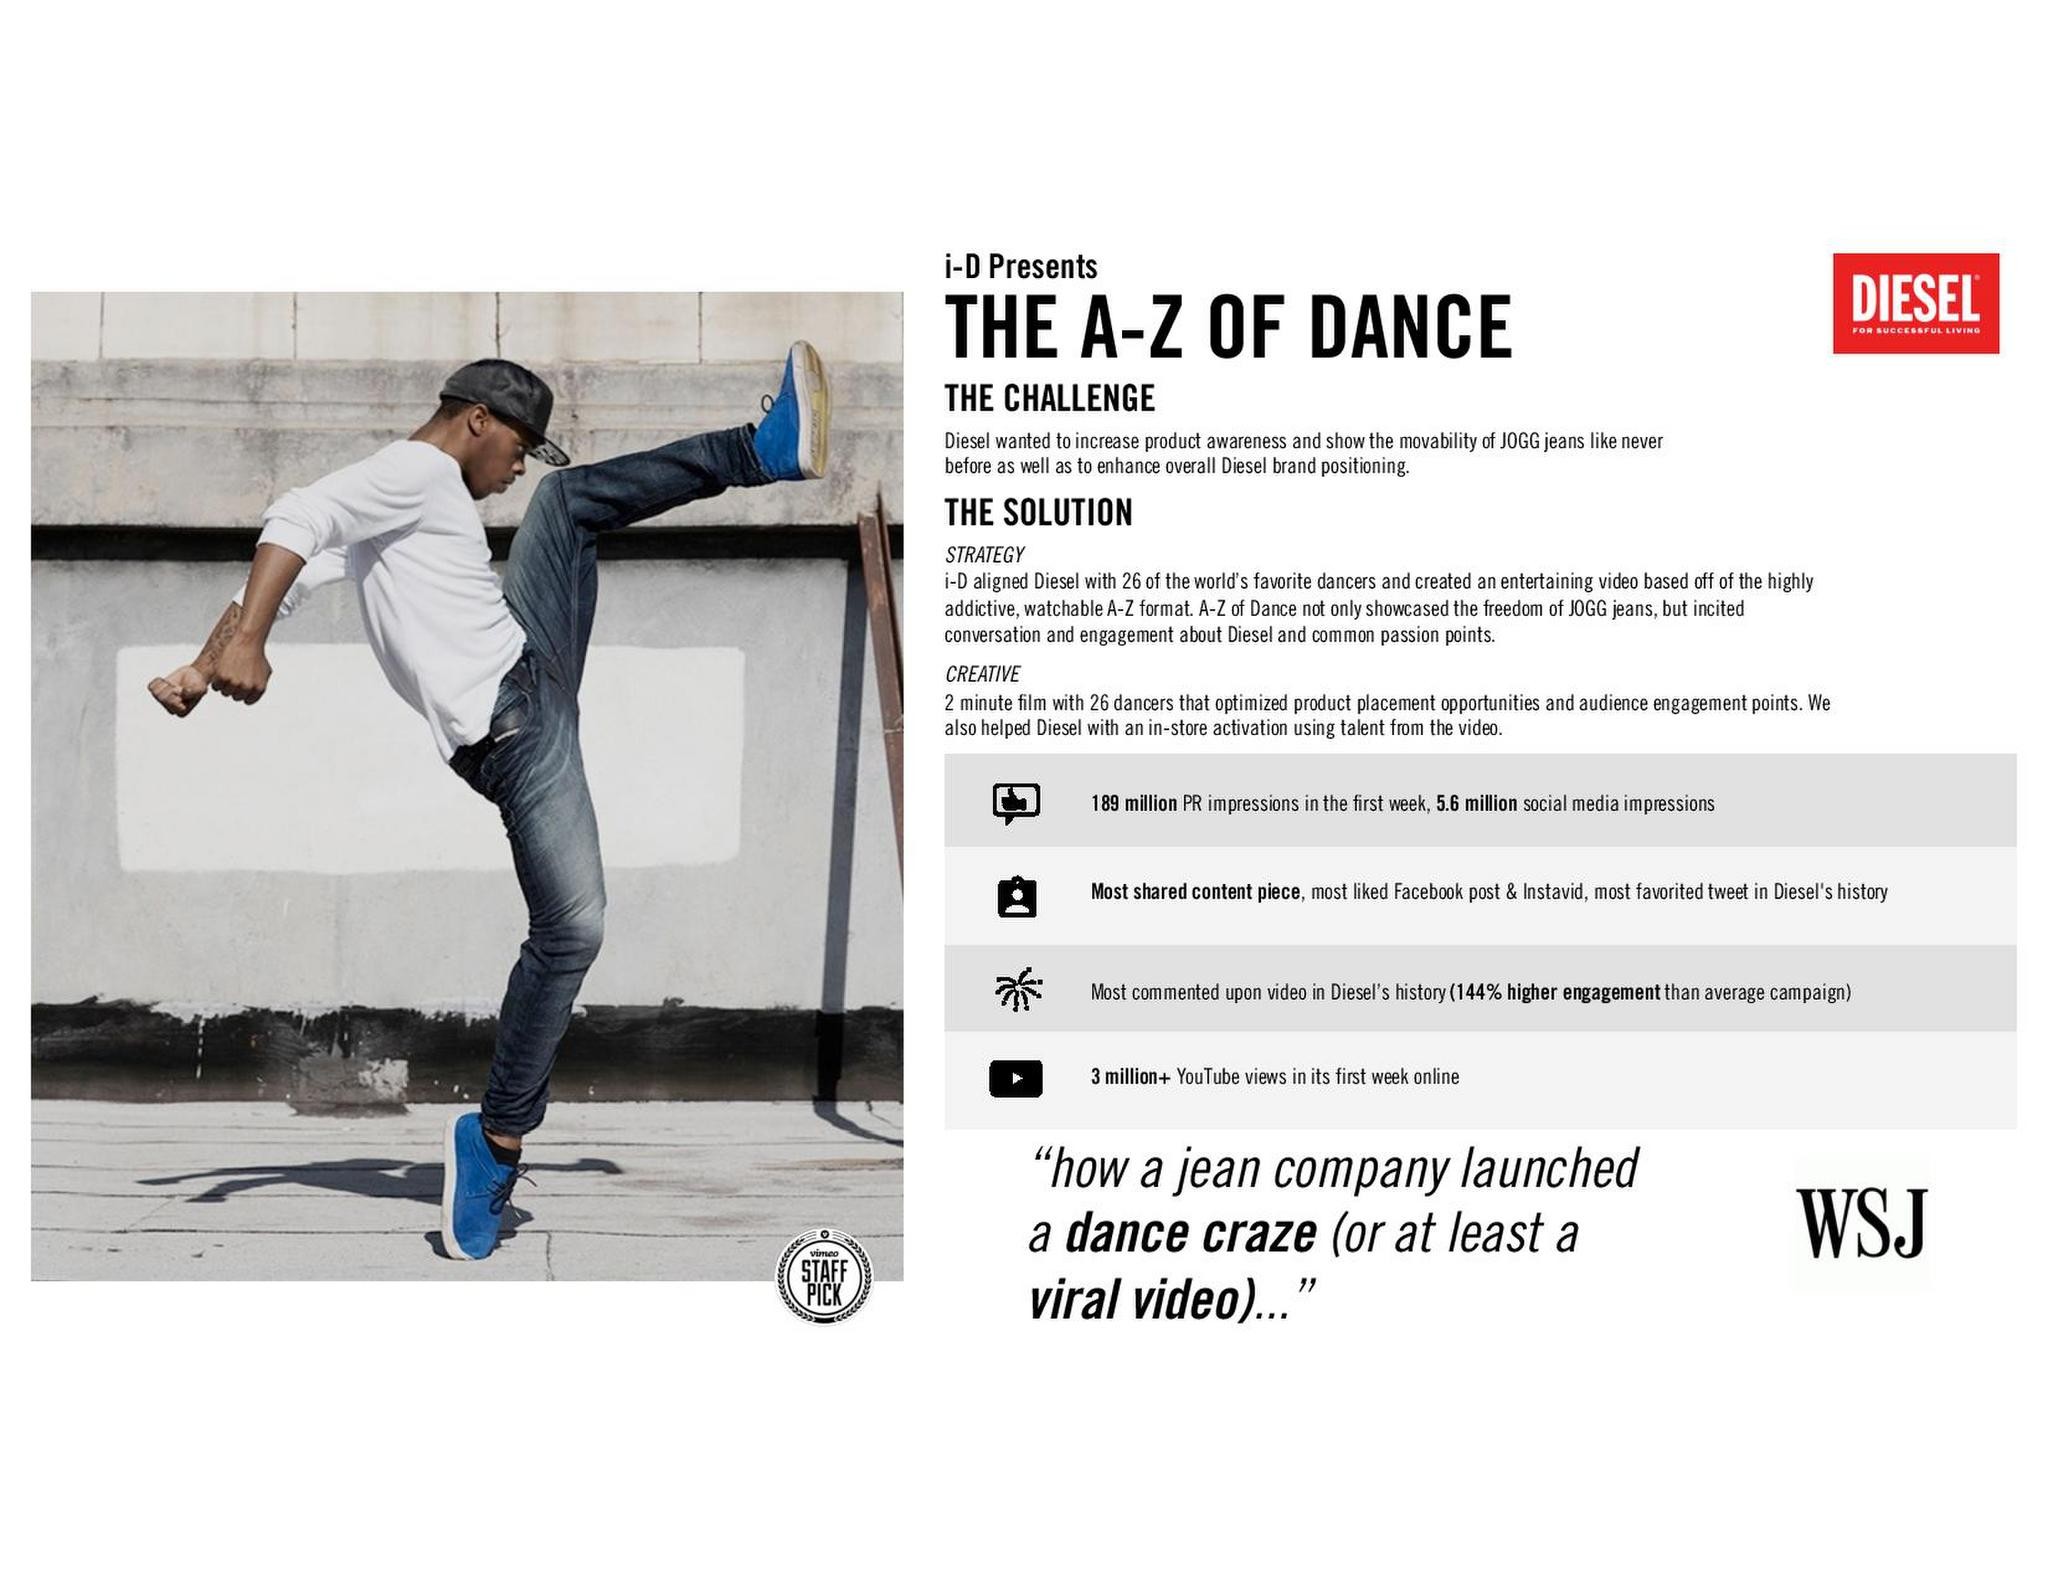 THE A-Z OF DANCE